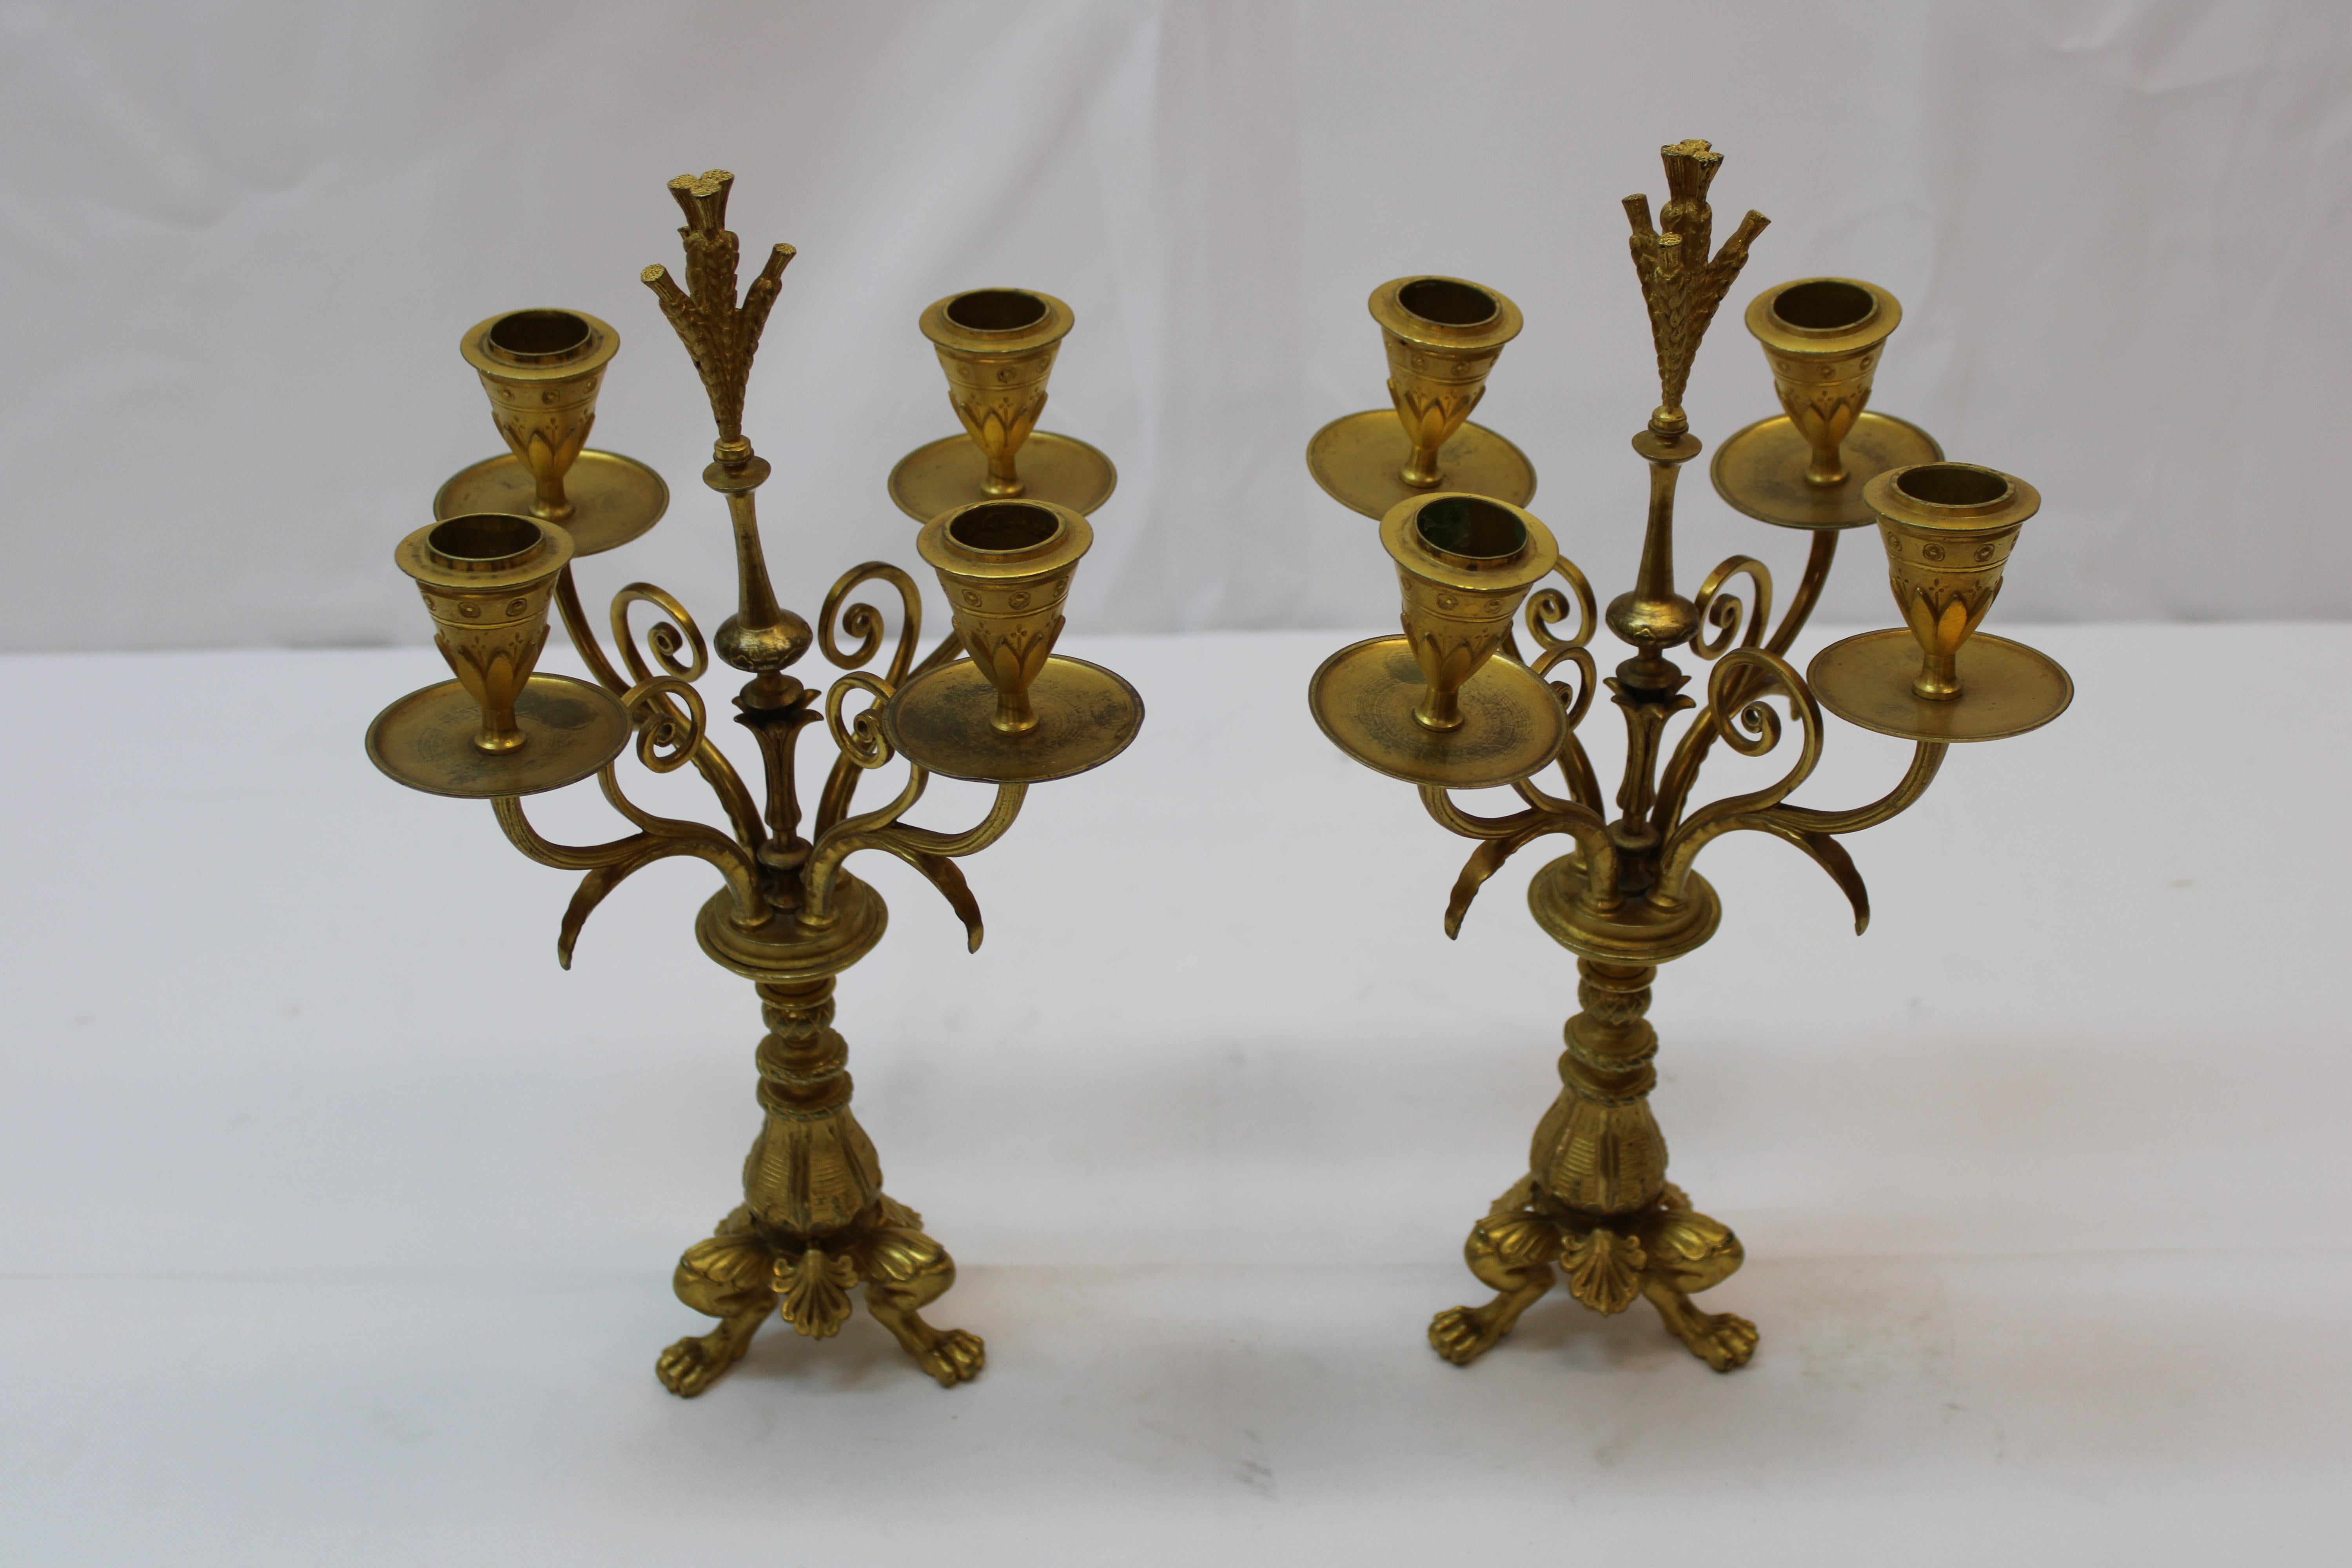 Pr four arm gilded candlesticks, 19th century with lion paw feet.